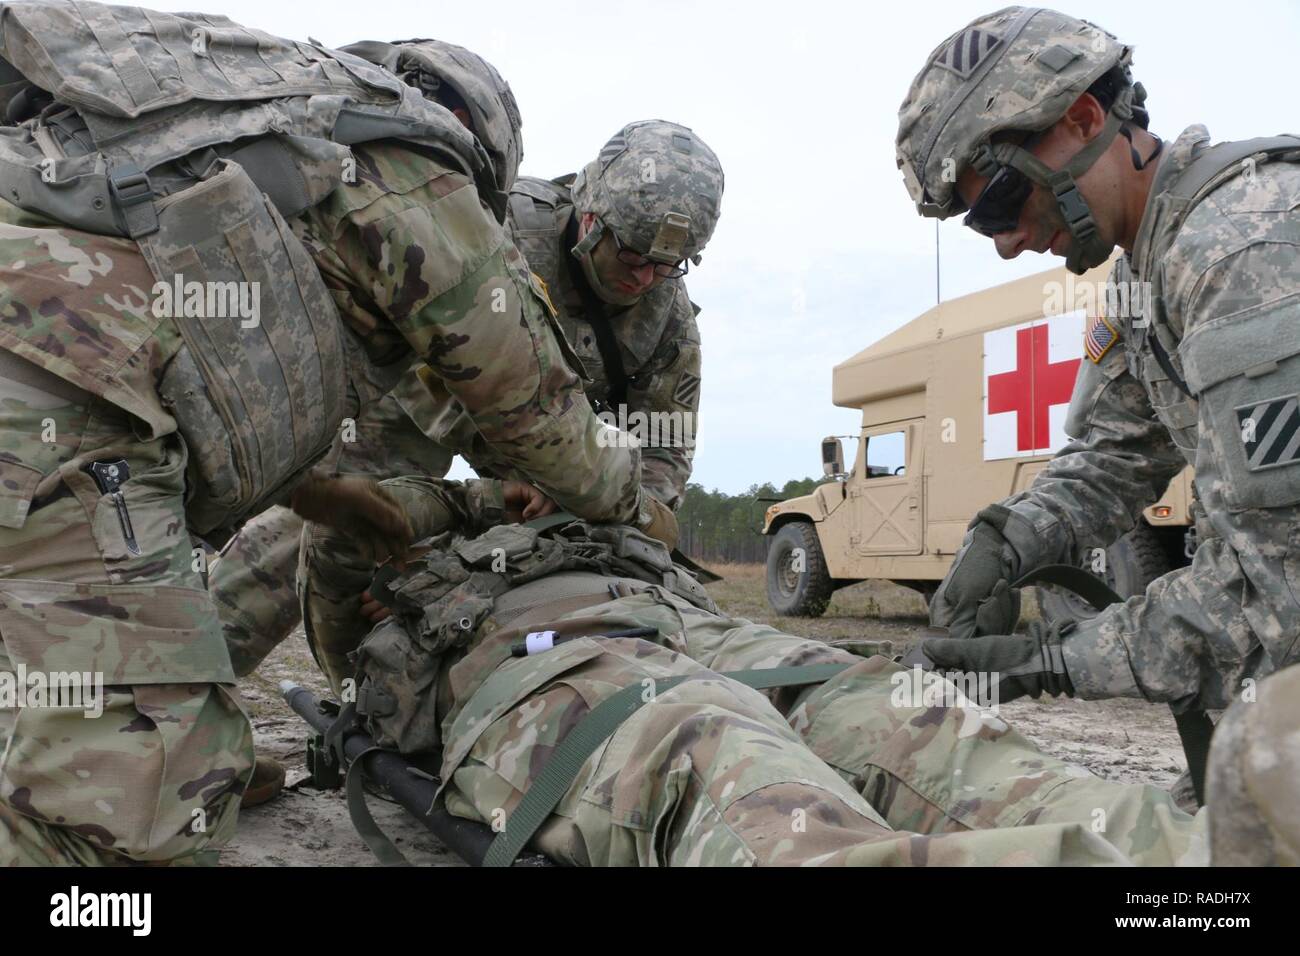 Soldiers of Bravo Company, 703rd Brigade Support Battalion, 2nd Infantry Brigade Combat Team, 3rd Infantry Division, strap a Soldier to a litter during medical training, January 26, 2017 at Fort Stewart, Ga. The battalion supported 3rd Battalion, 7th Infantry Regiment, 2nd IBCT, with on-call recovery, medical evacuation, and logistical distribution during training exercise Baler Focus, January 25 - 27. Stock Photo